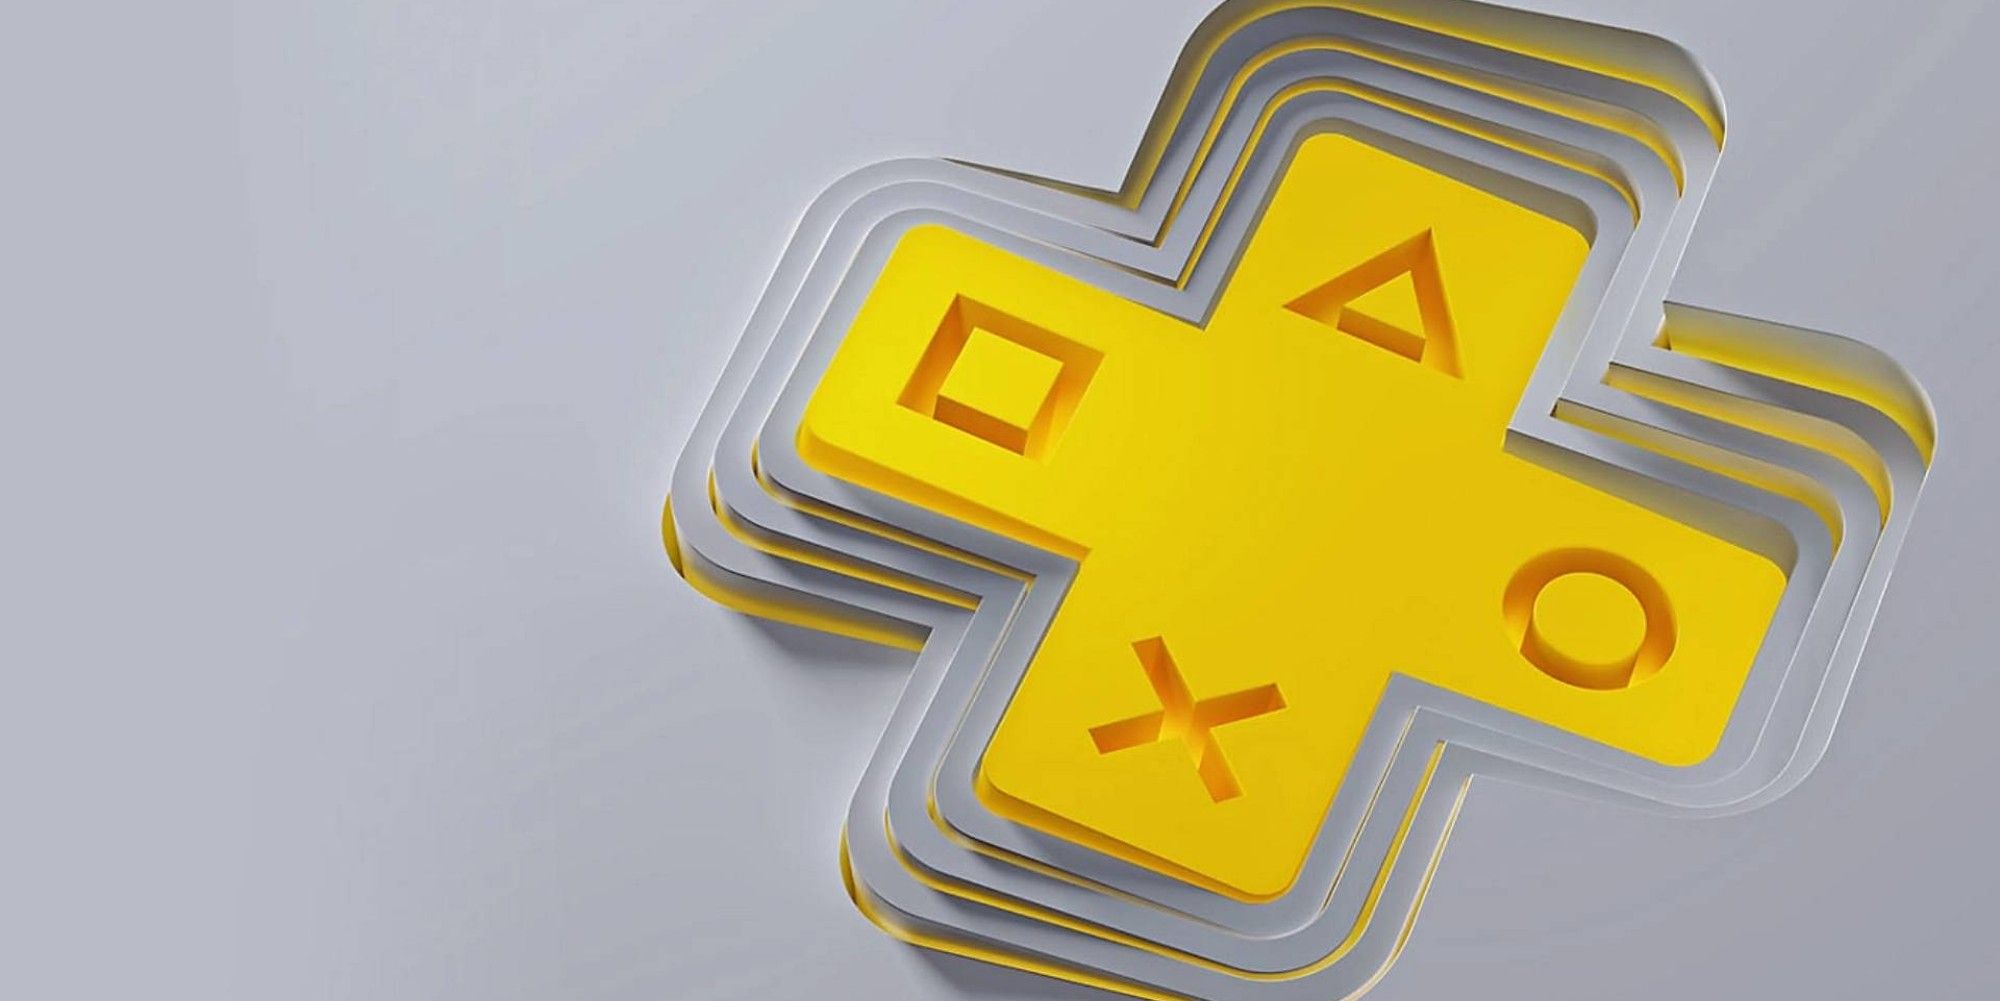 PlayStation Plus subscribers outraged with latest Black Friday deal